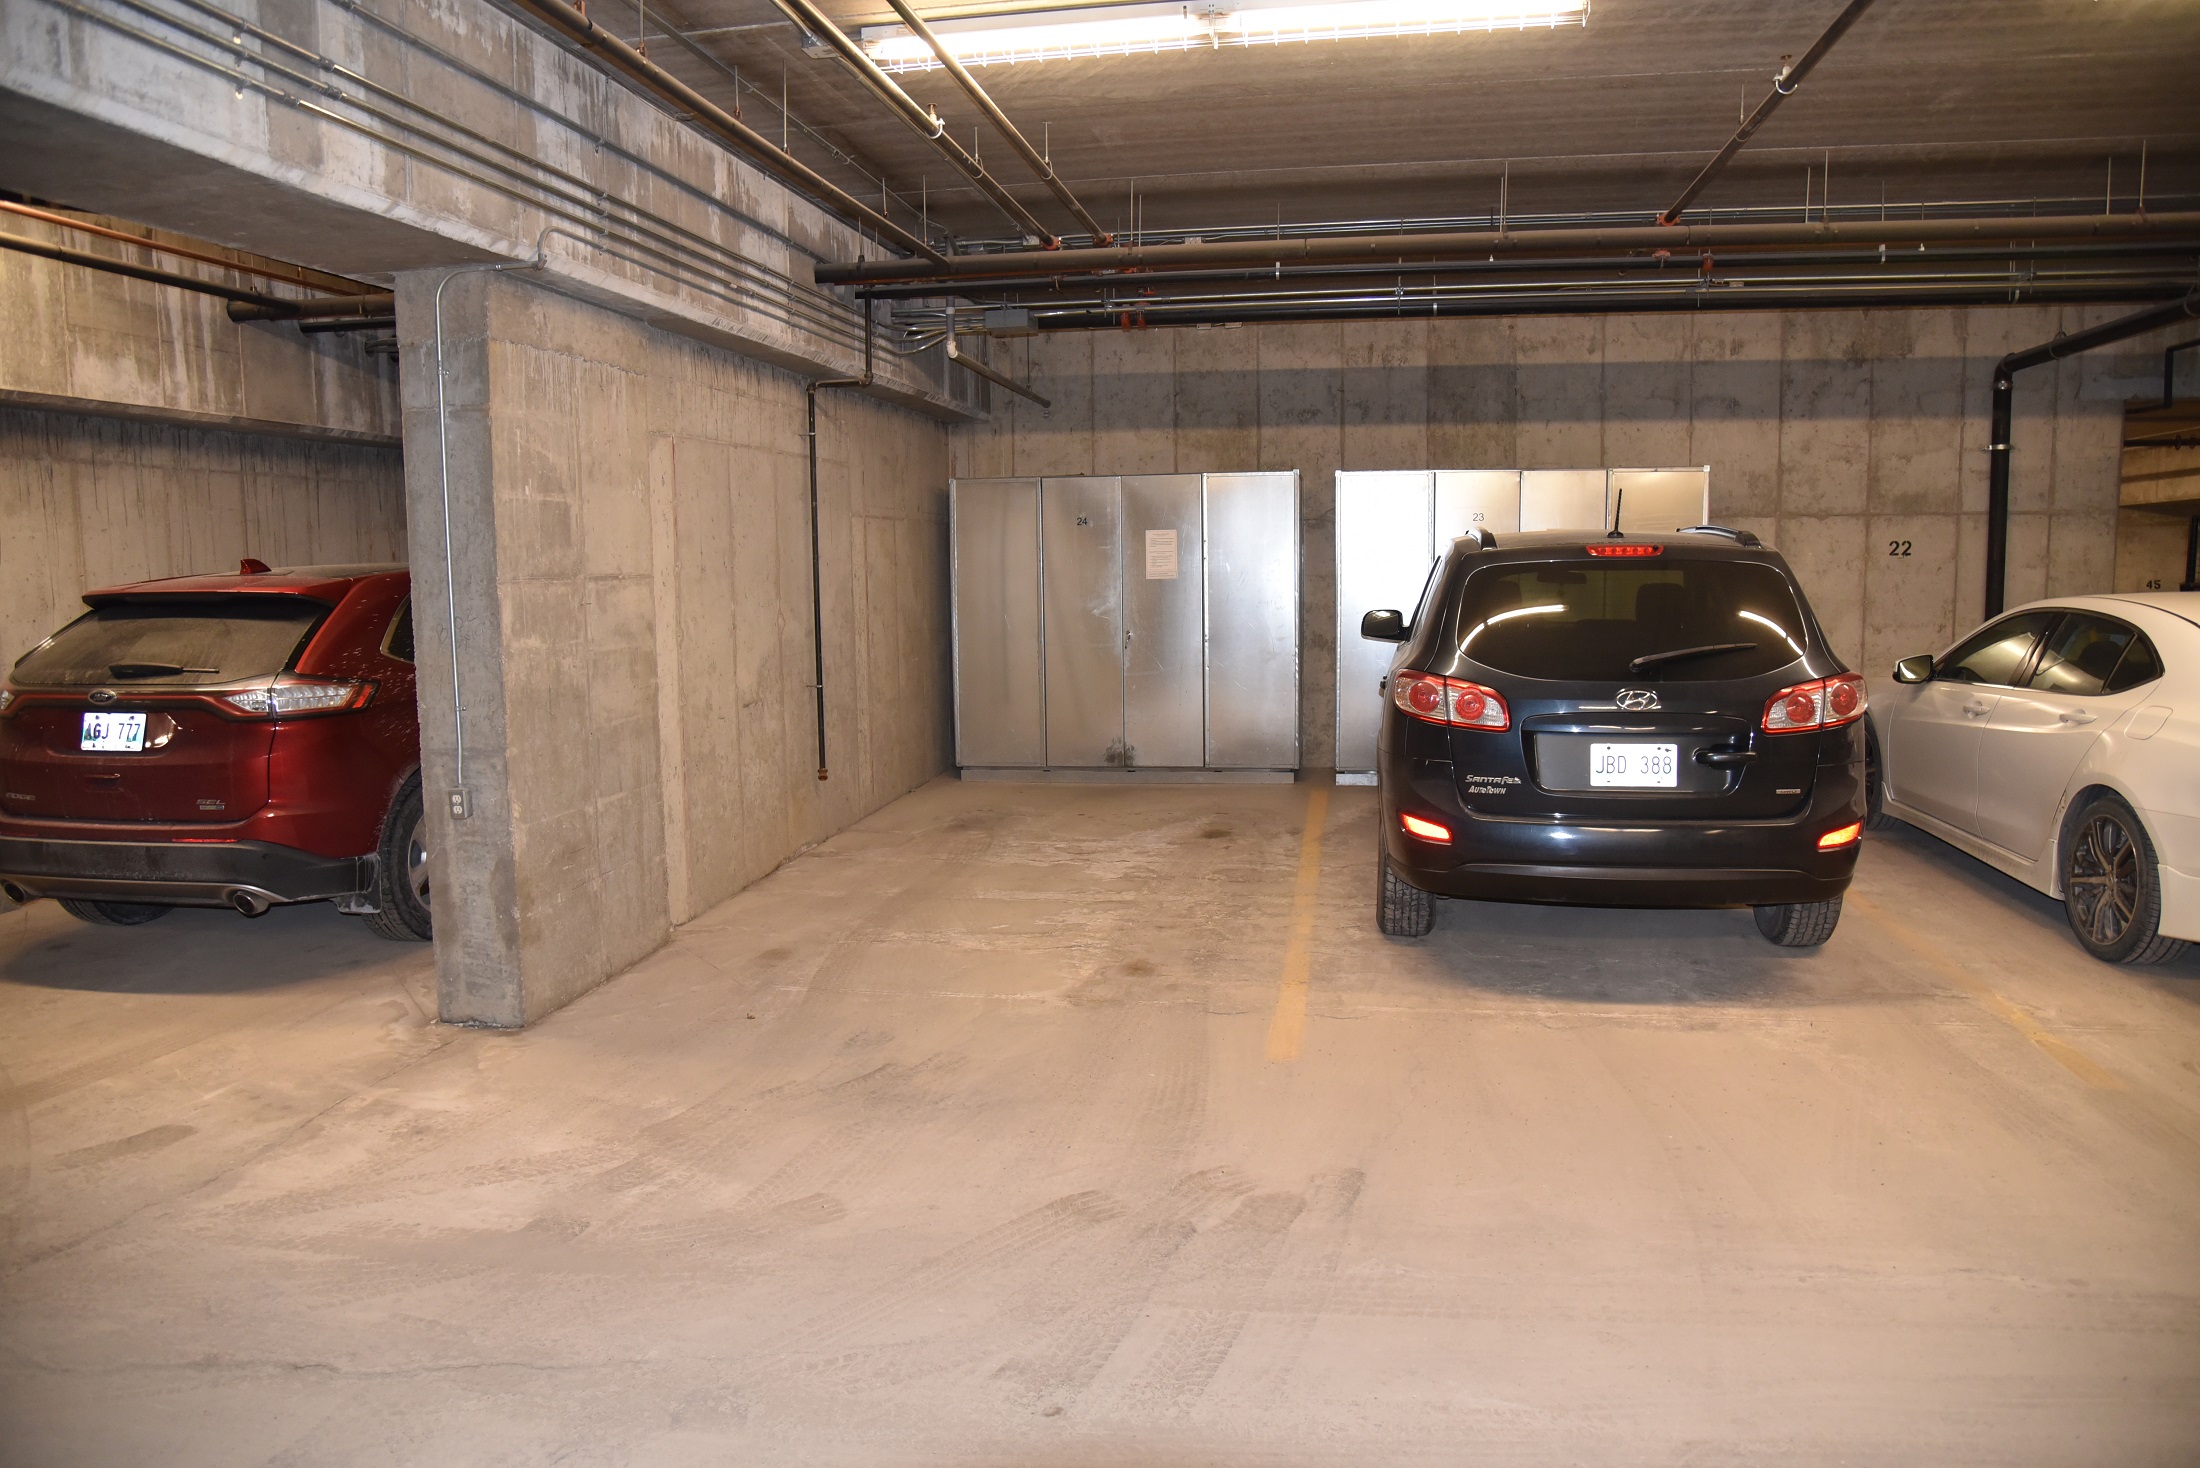 Indoor parking stall #24 and storage